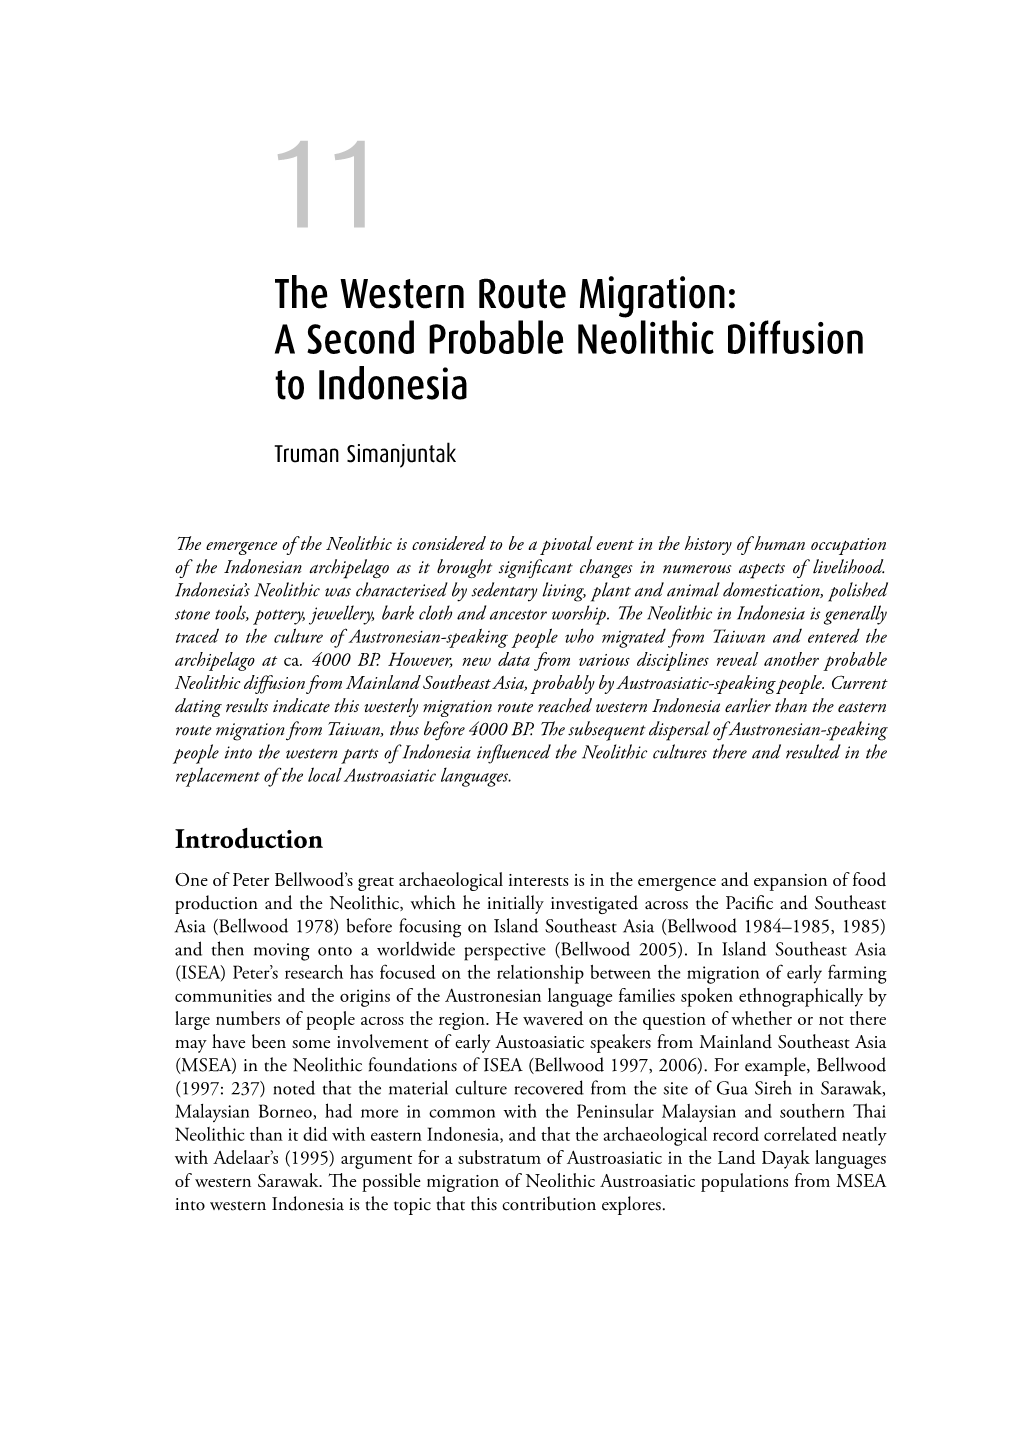 Western Indonesia Earlier Than the Eastern Route Migration from Taiwan, Thus Before 4000 BP